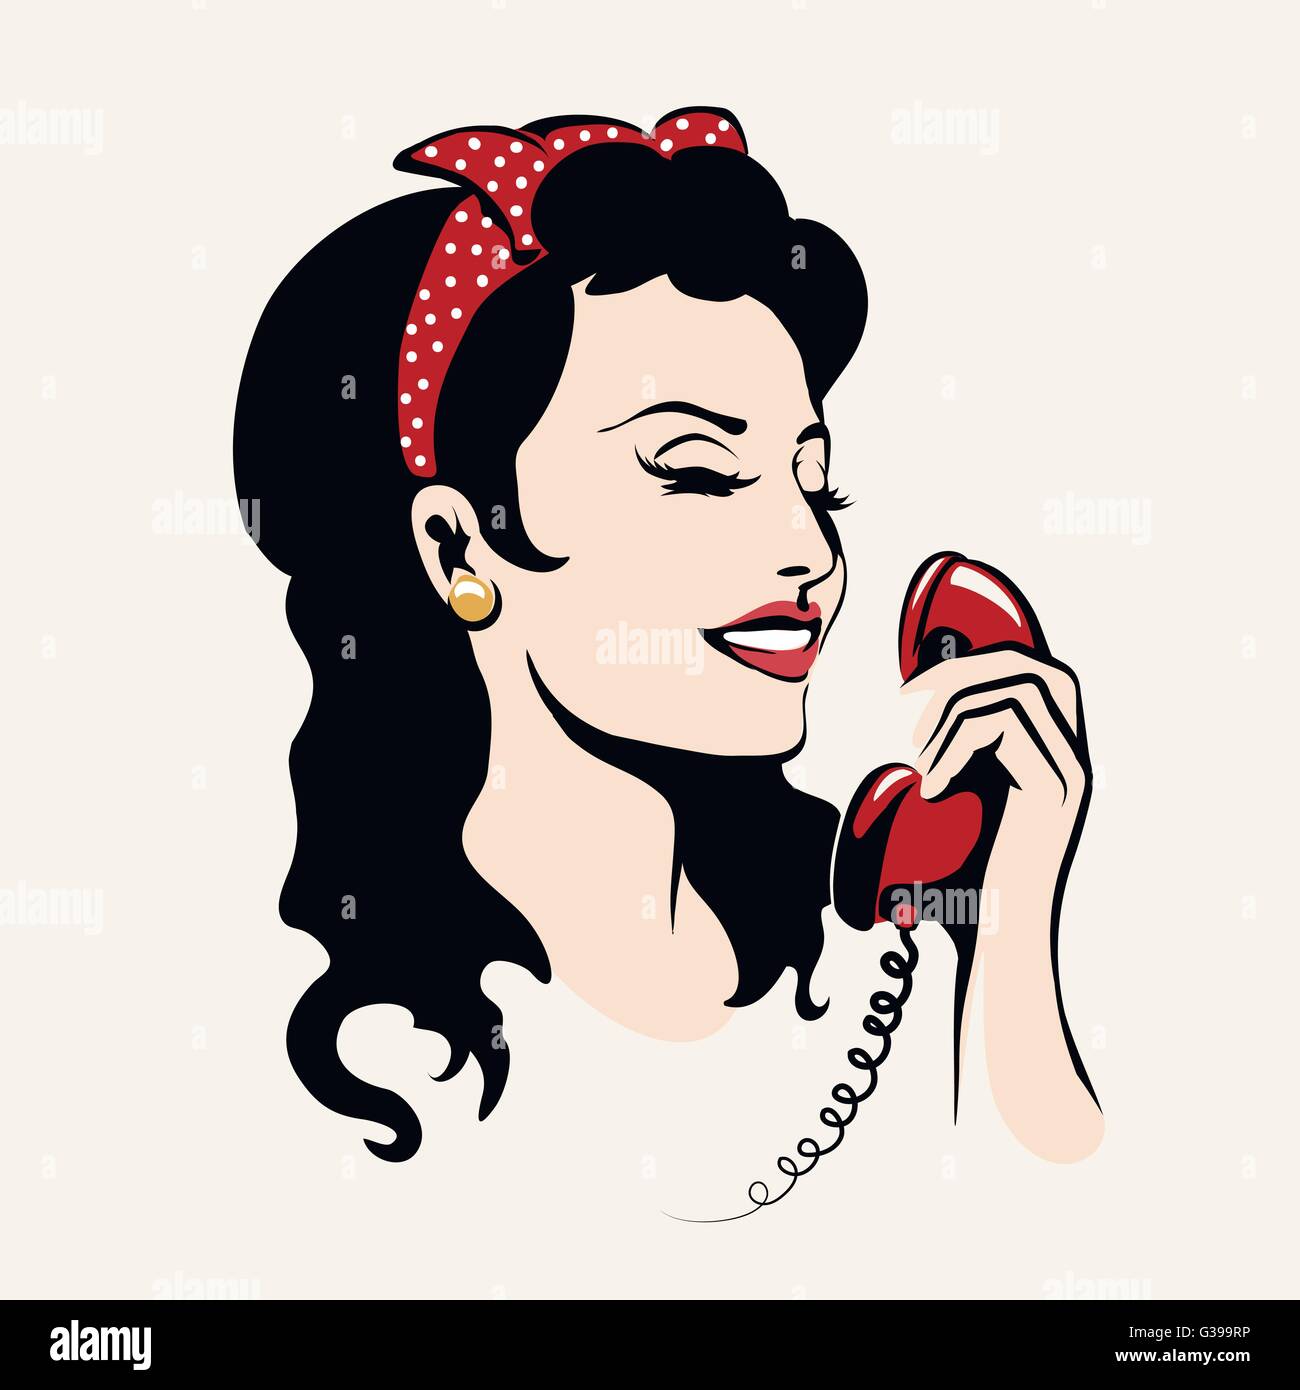 Pretty woman laughing and talking on the phone, pop art illustration. Stock Vector